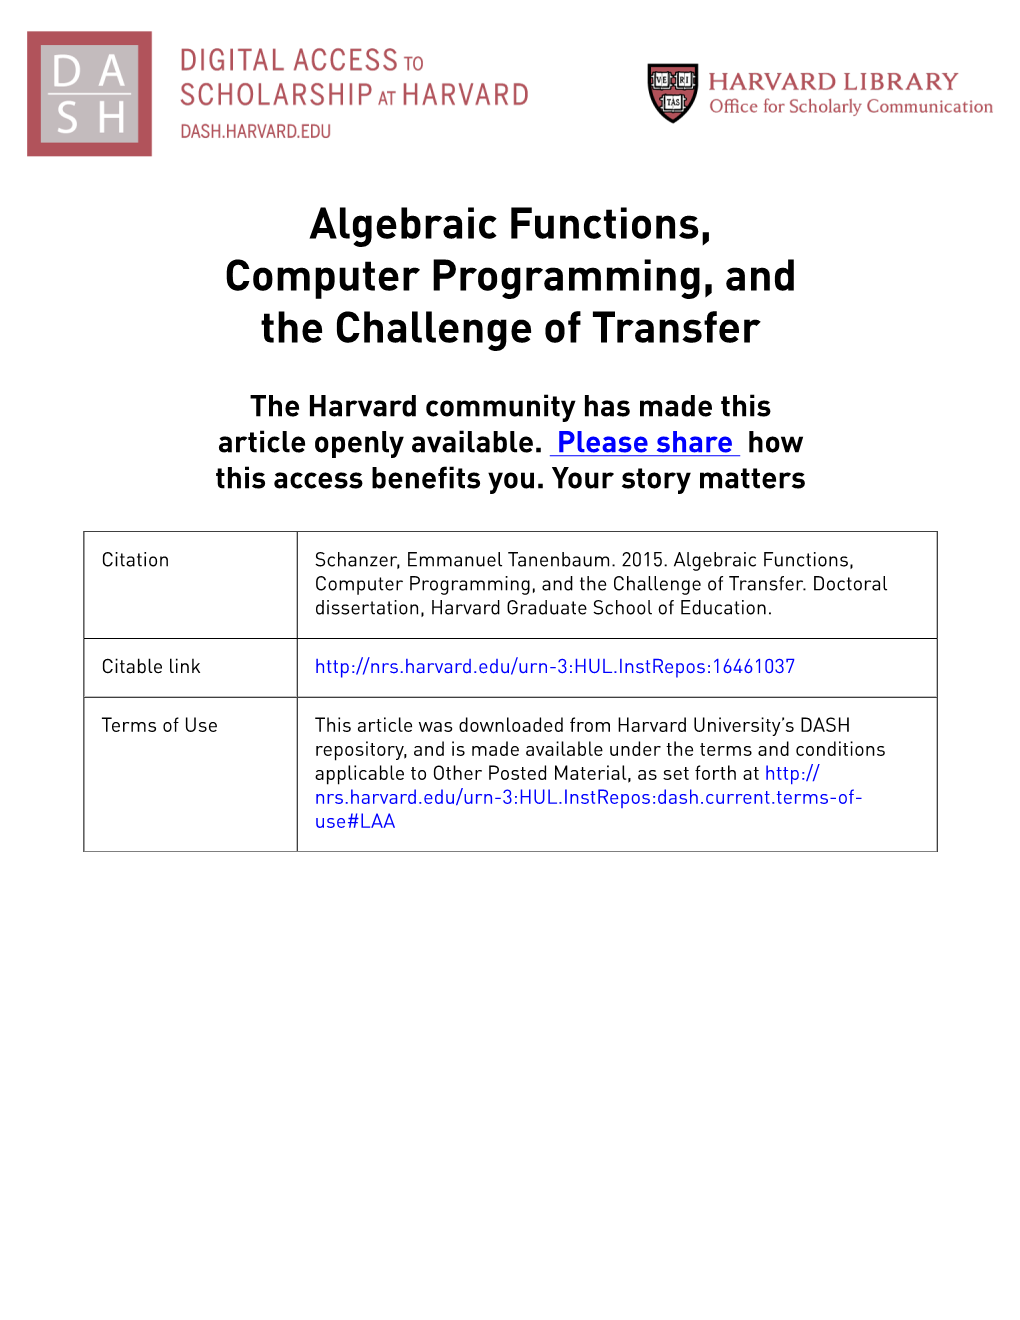 Algebraic Functions, Computer Programming, and the Challenge of Transfer